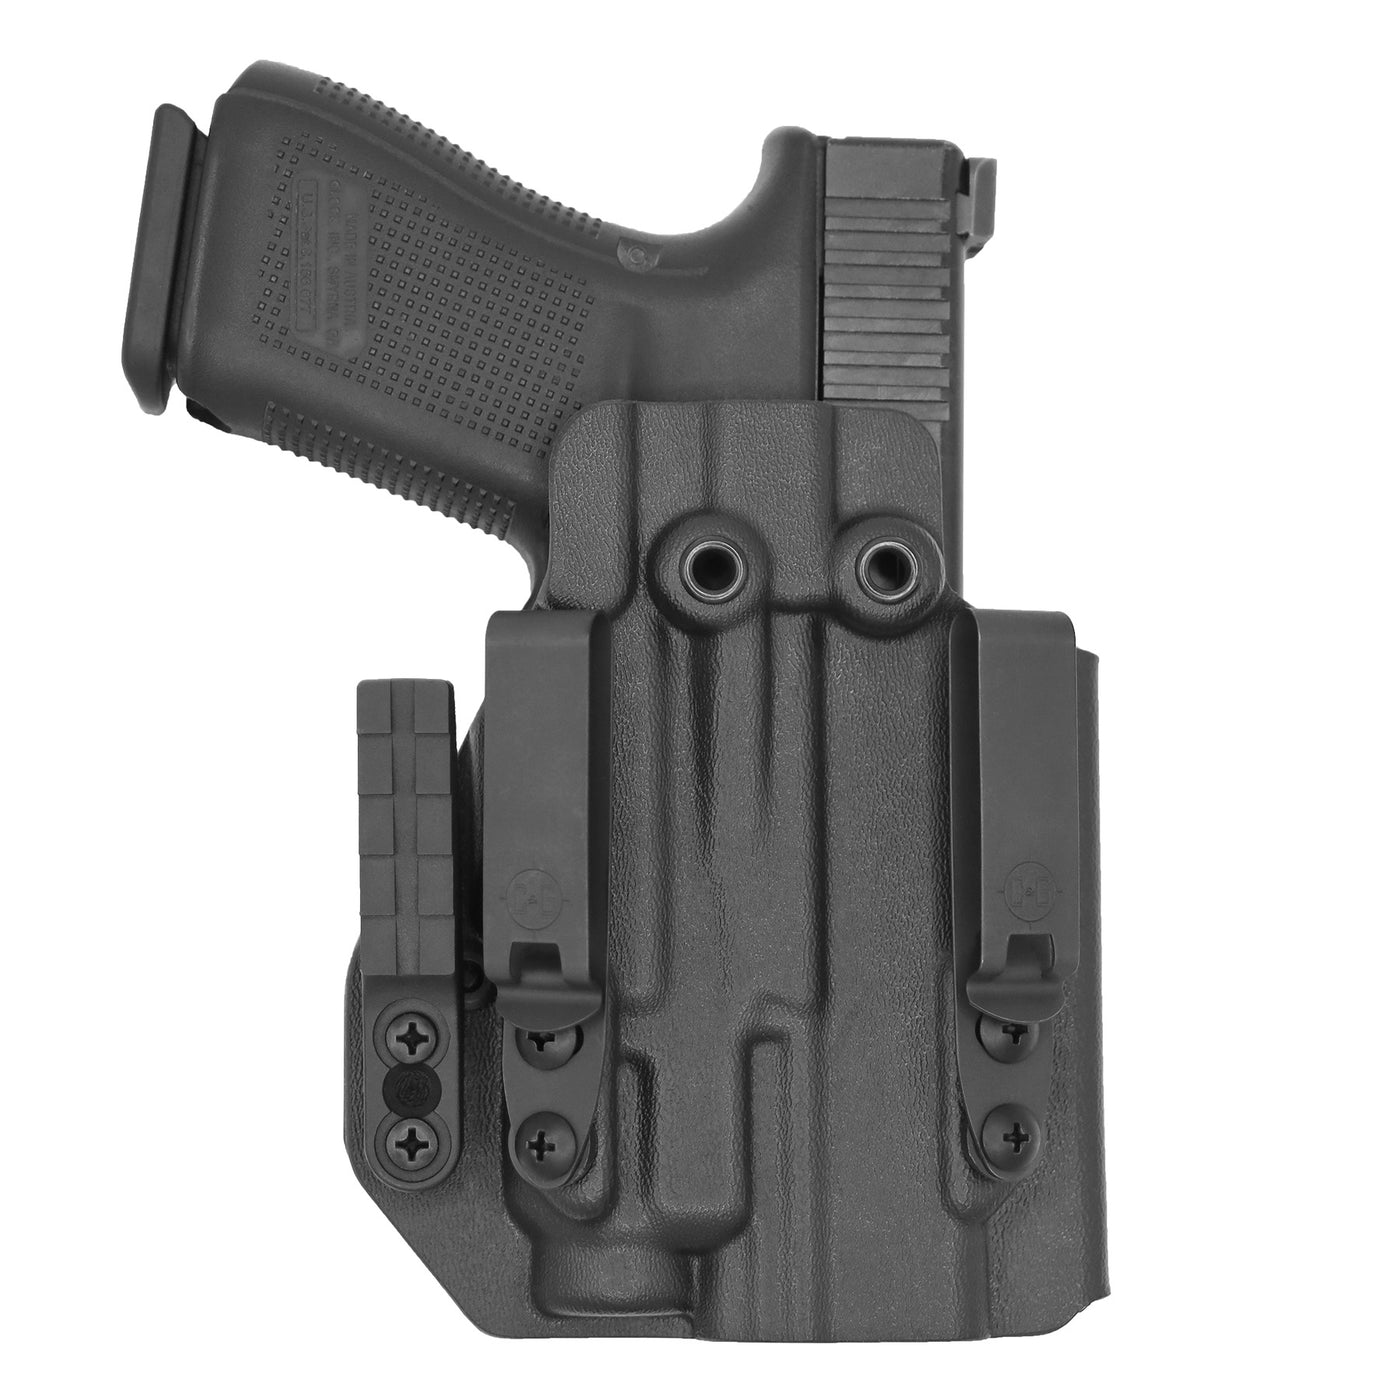 C&G Holsters Quickship IWB ALPHA UPGRADE Tactical Glock 19/23 Streamlight TLR7 in holstered position